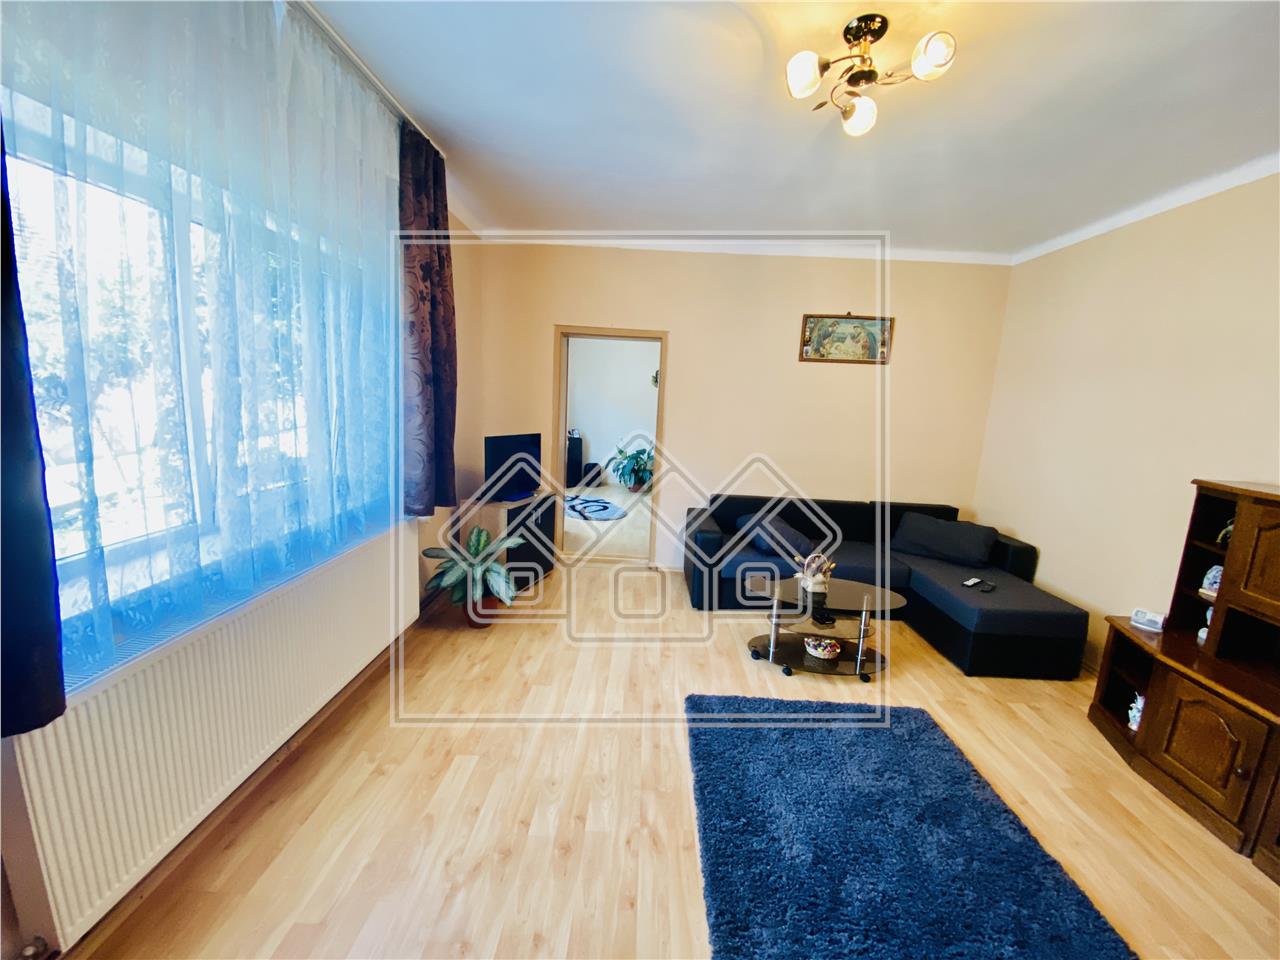 House for sale in Sibiu - duplex type - furnished and equipped - Turni